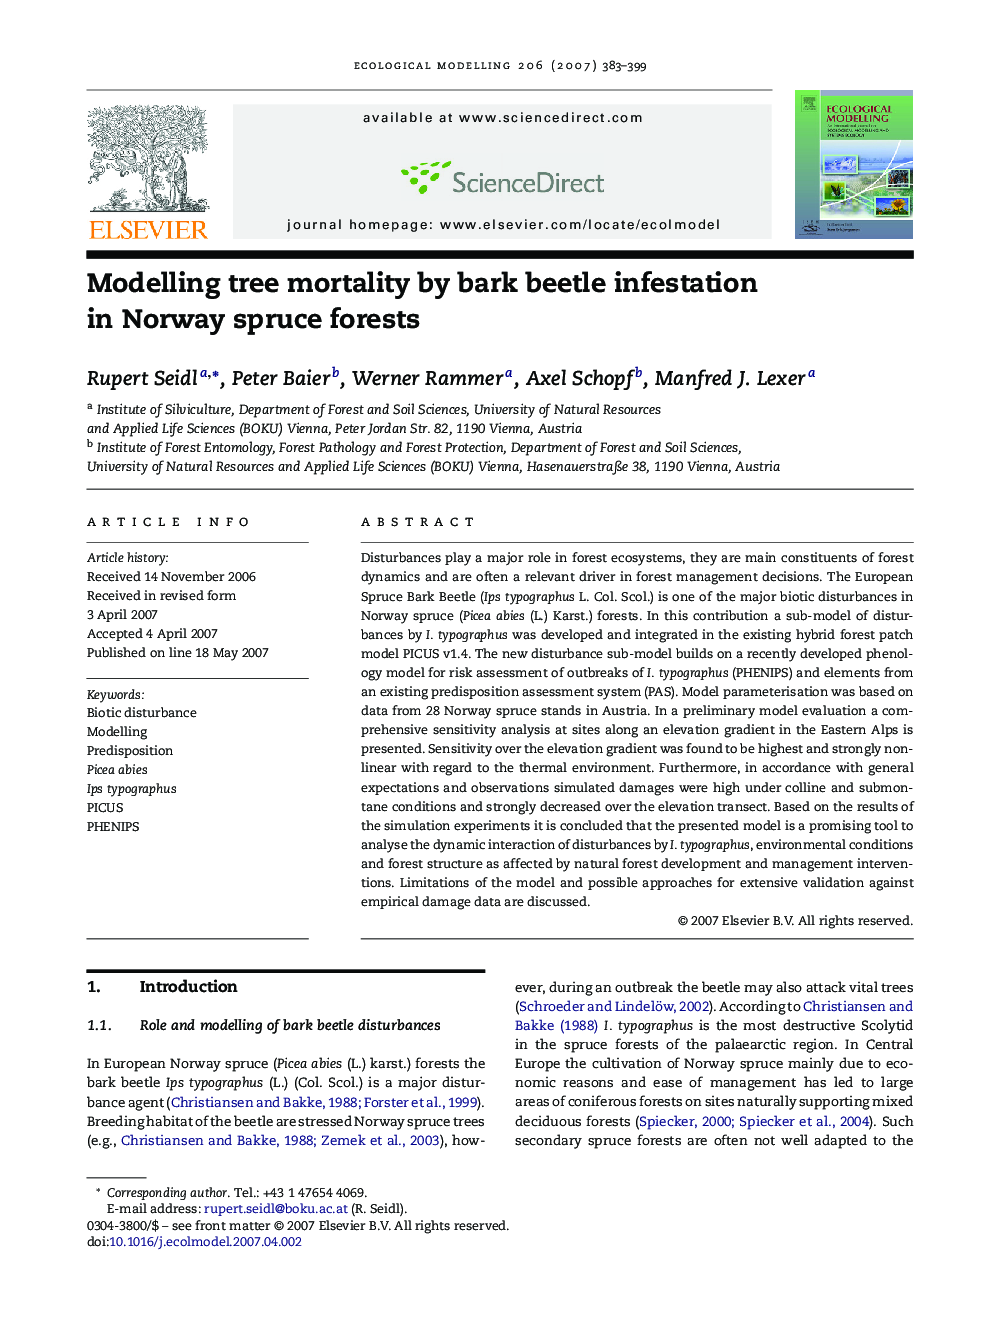 Modelling tree mortality by bark beetle infestation in Norway spruce forests